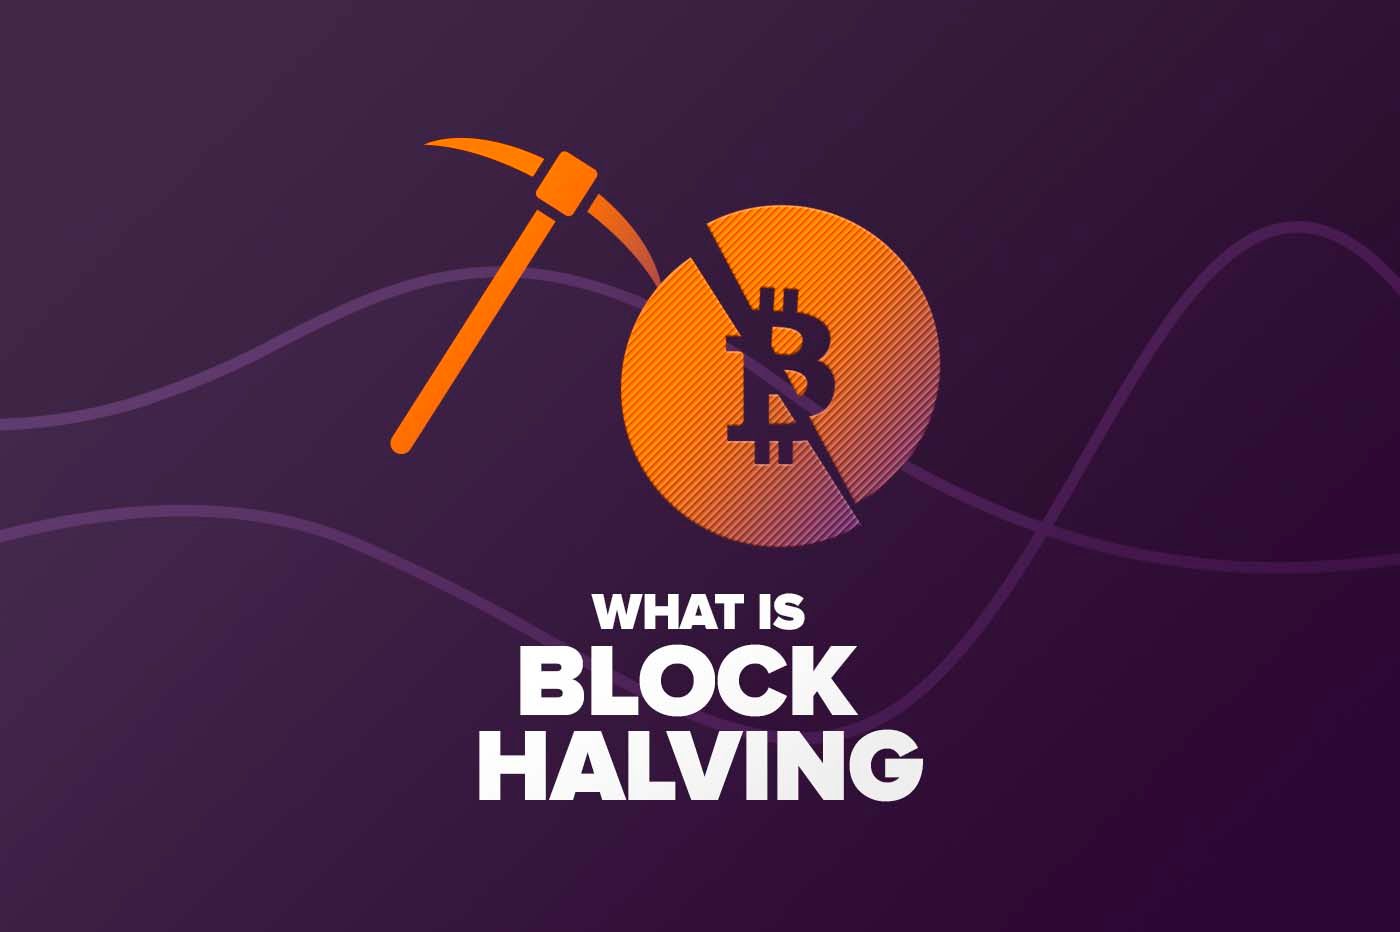 Article Bitcoin Halving 2020: What Block Halving Has to Do with Main Cryptocurrencies